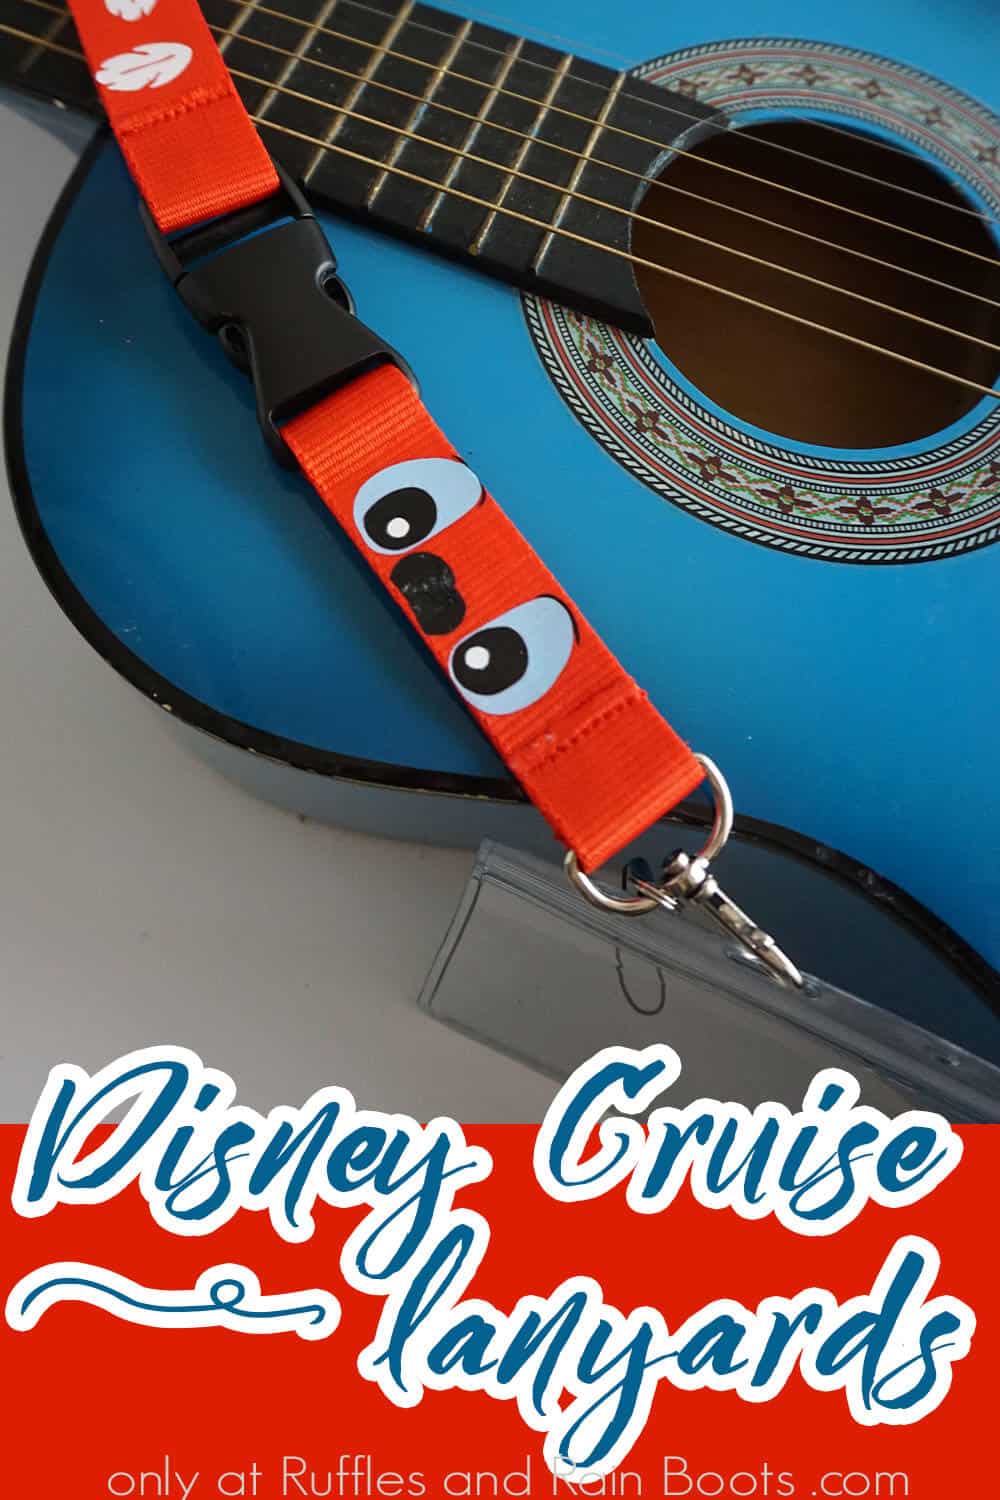 diy fish extender gift cruise craft with text which reads disney cruise lanyards